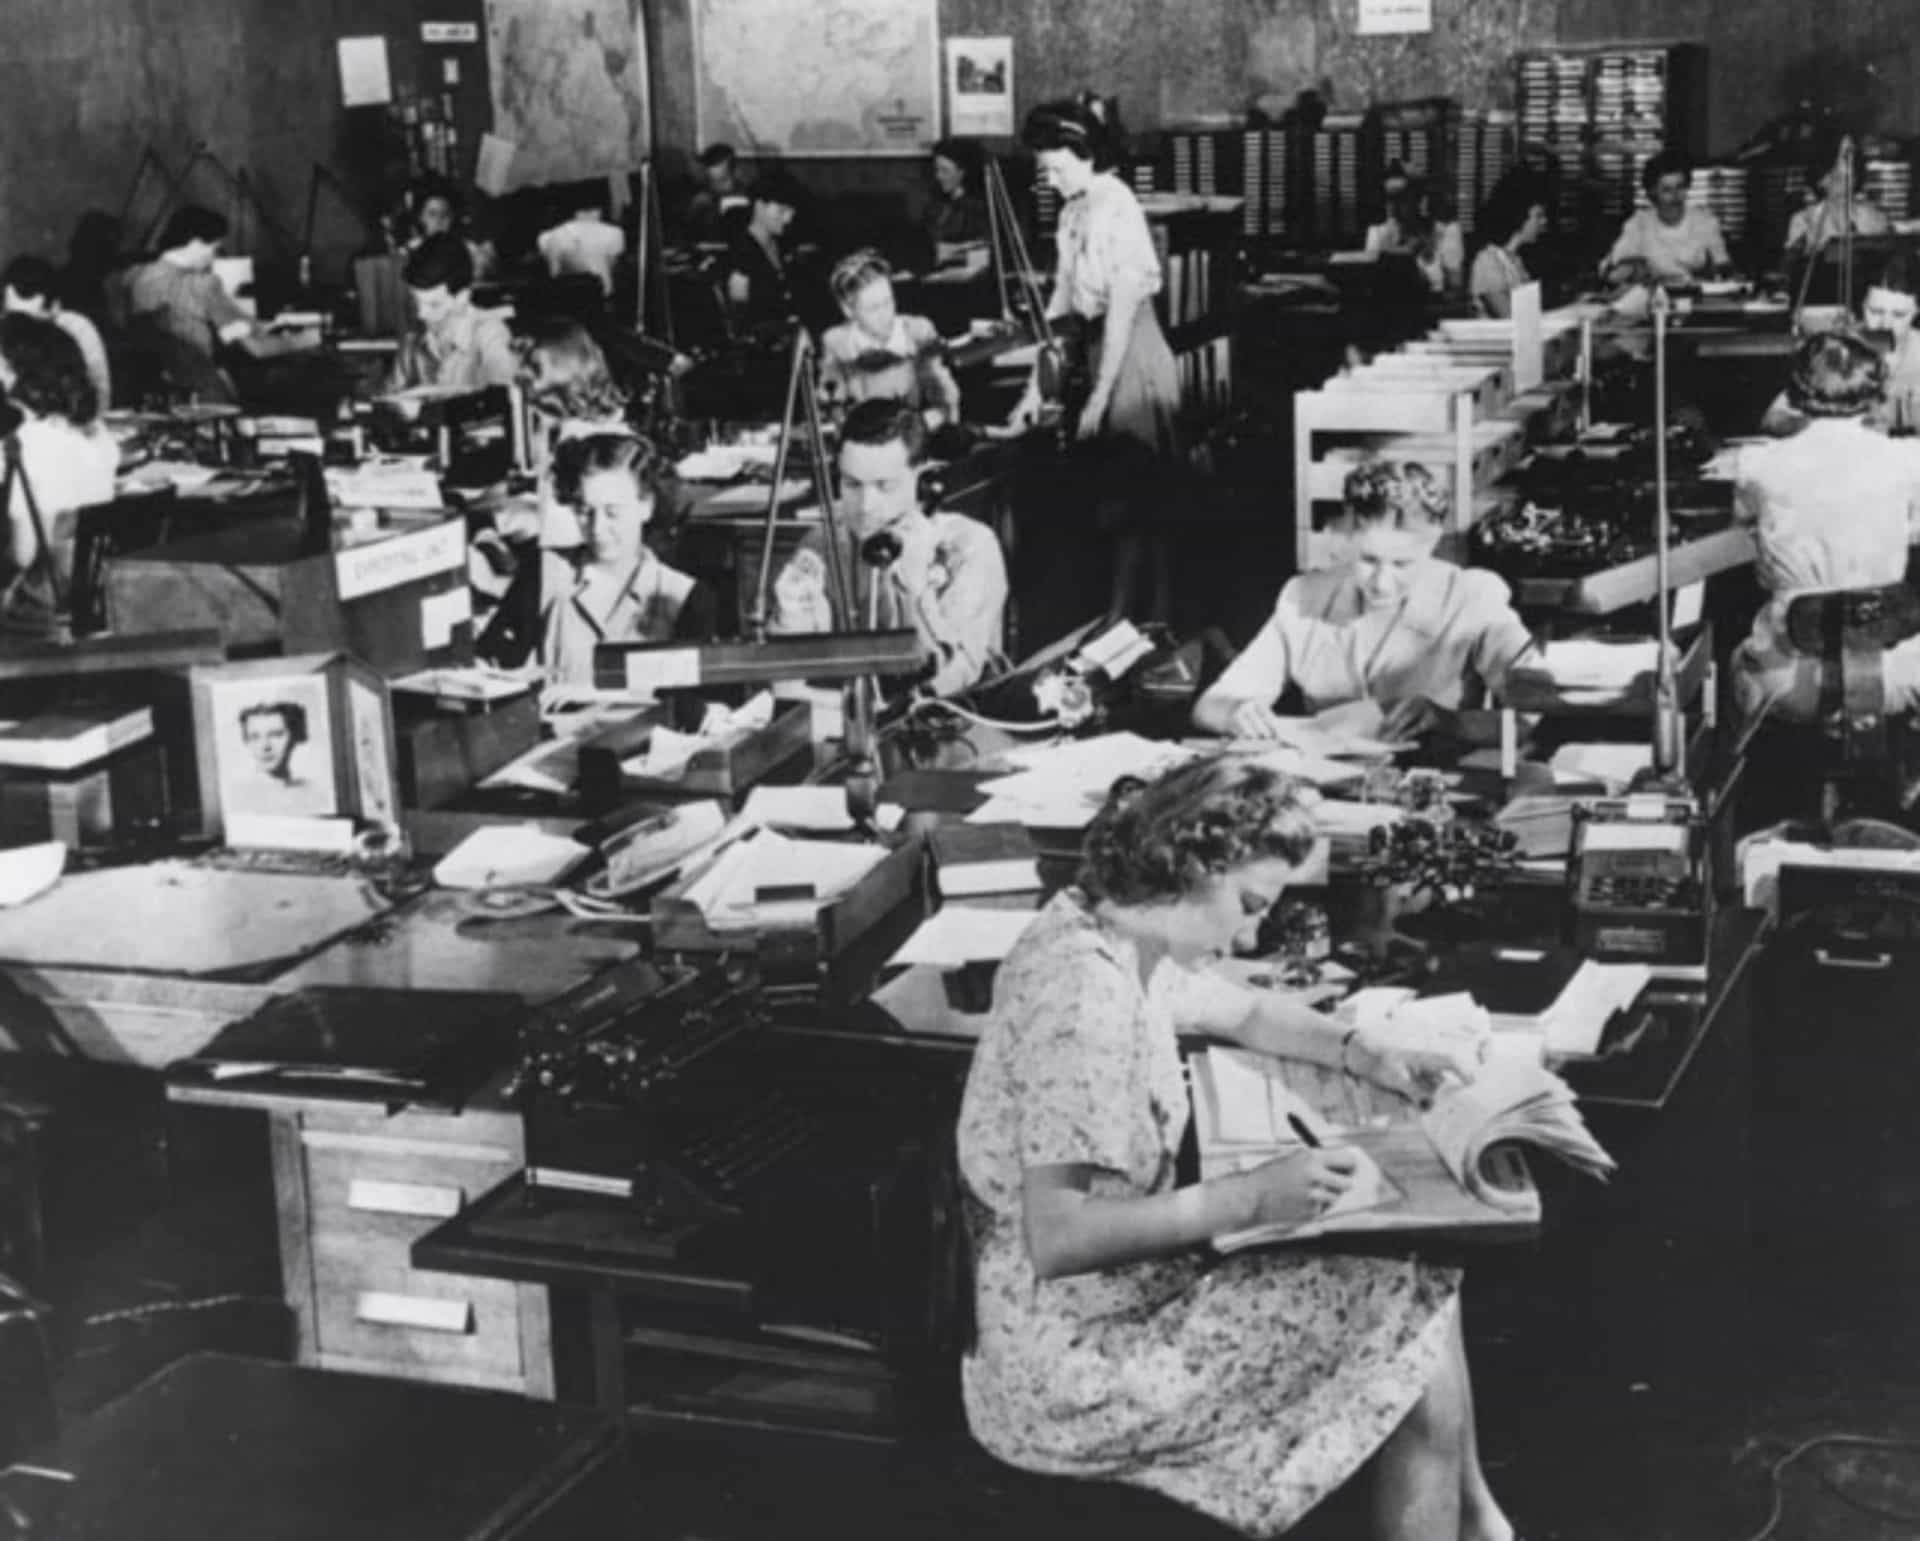 <p>Pictured: female US Army Signals Intelligence Service cryptologists at work in 1943 at Arlington Hall in Virginia. The more than 10,000 women who served as cryptographers (code makers) and cryptanalysts (<a href="https://www.starsinsider.com/lifestyle/505189/codes-that-remain-uncracked-to-this-day" rel="noopener">code</a> breakers) for the United States military during the Second World War were known as Code Girls.</p><p><a href="https://www.msn.com/en-us/community/channel/vid-7xx8mnucu55yw63we9va2gwr7uihbxwc68fxqp25x6tg4ftibpra?cvid=94631541bc0f4f89bfd59158d696ad7e">Follow us and access great exclusive content everyday</a></p>